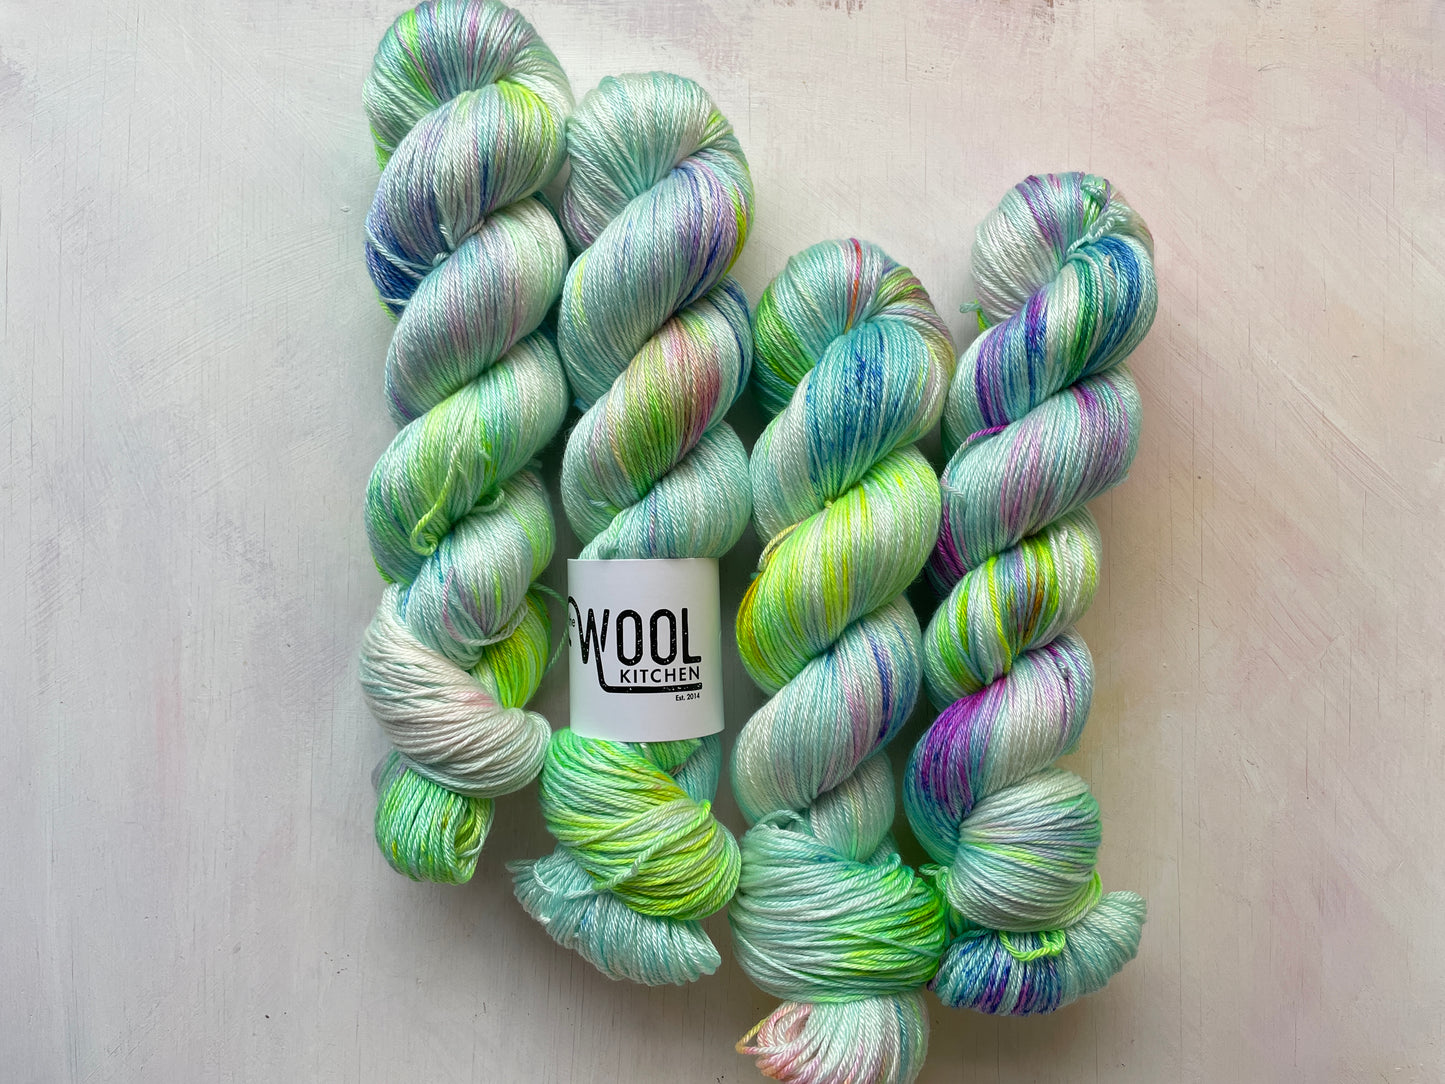 Bioluminescence from the Luxury 4ply Merino Silk Yarn Collection from the hand dyed yarn expert, The Wool Kitchen